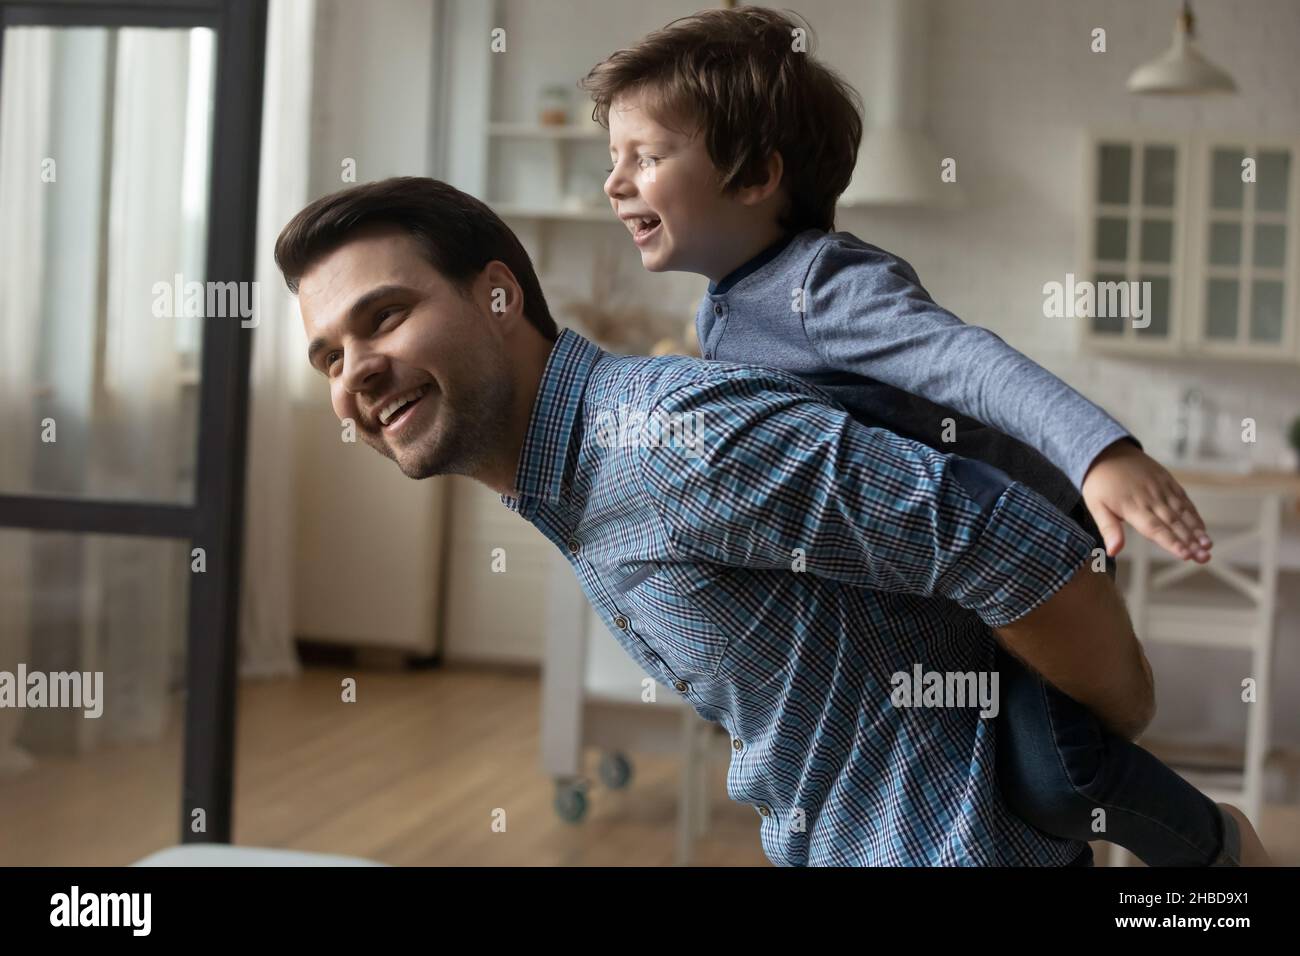 Loving Caucasian father piggy backing little son at home Stock Photo